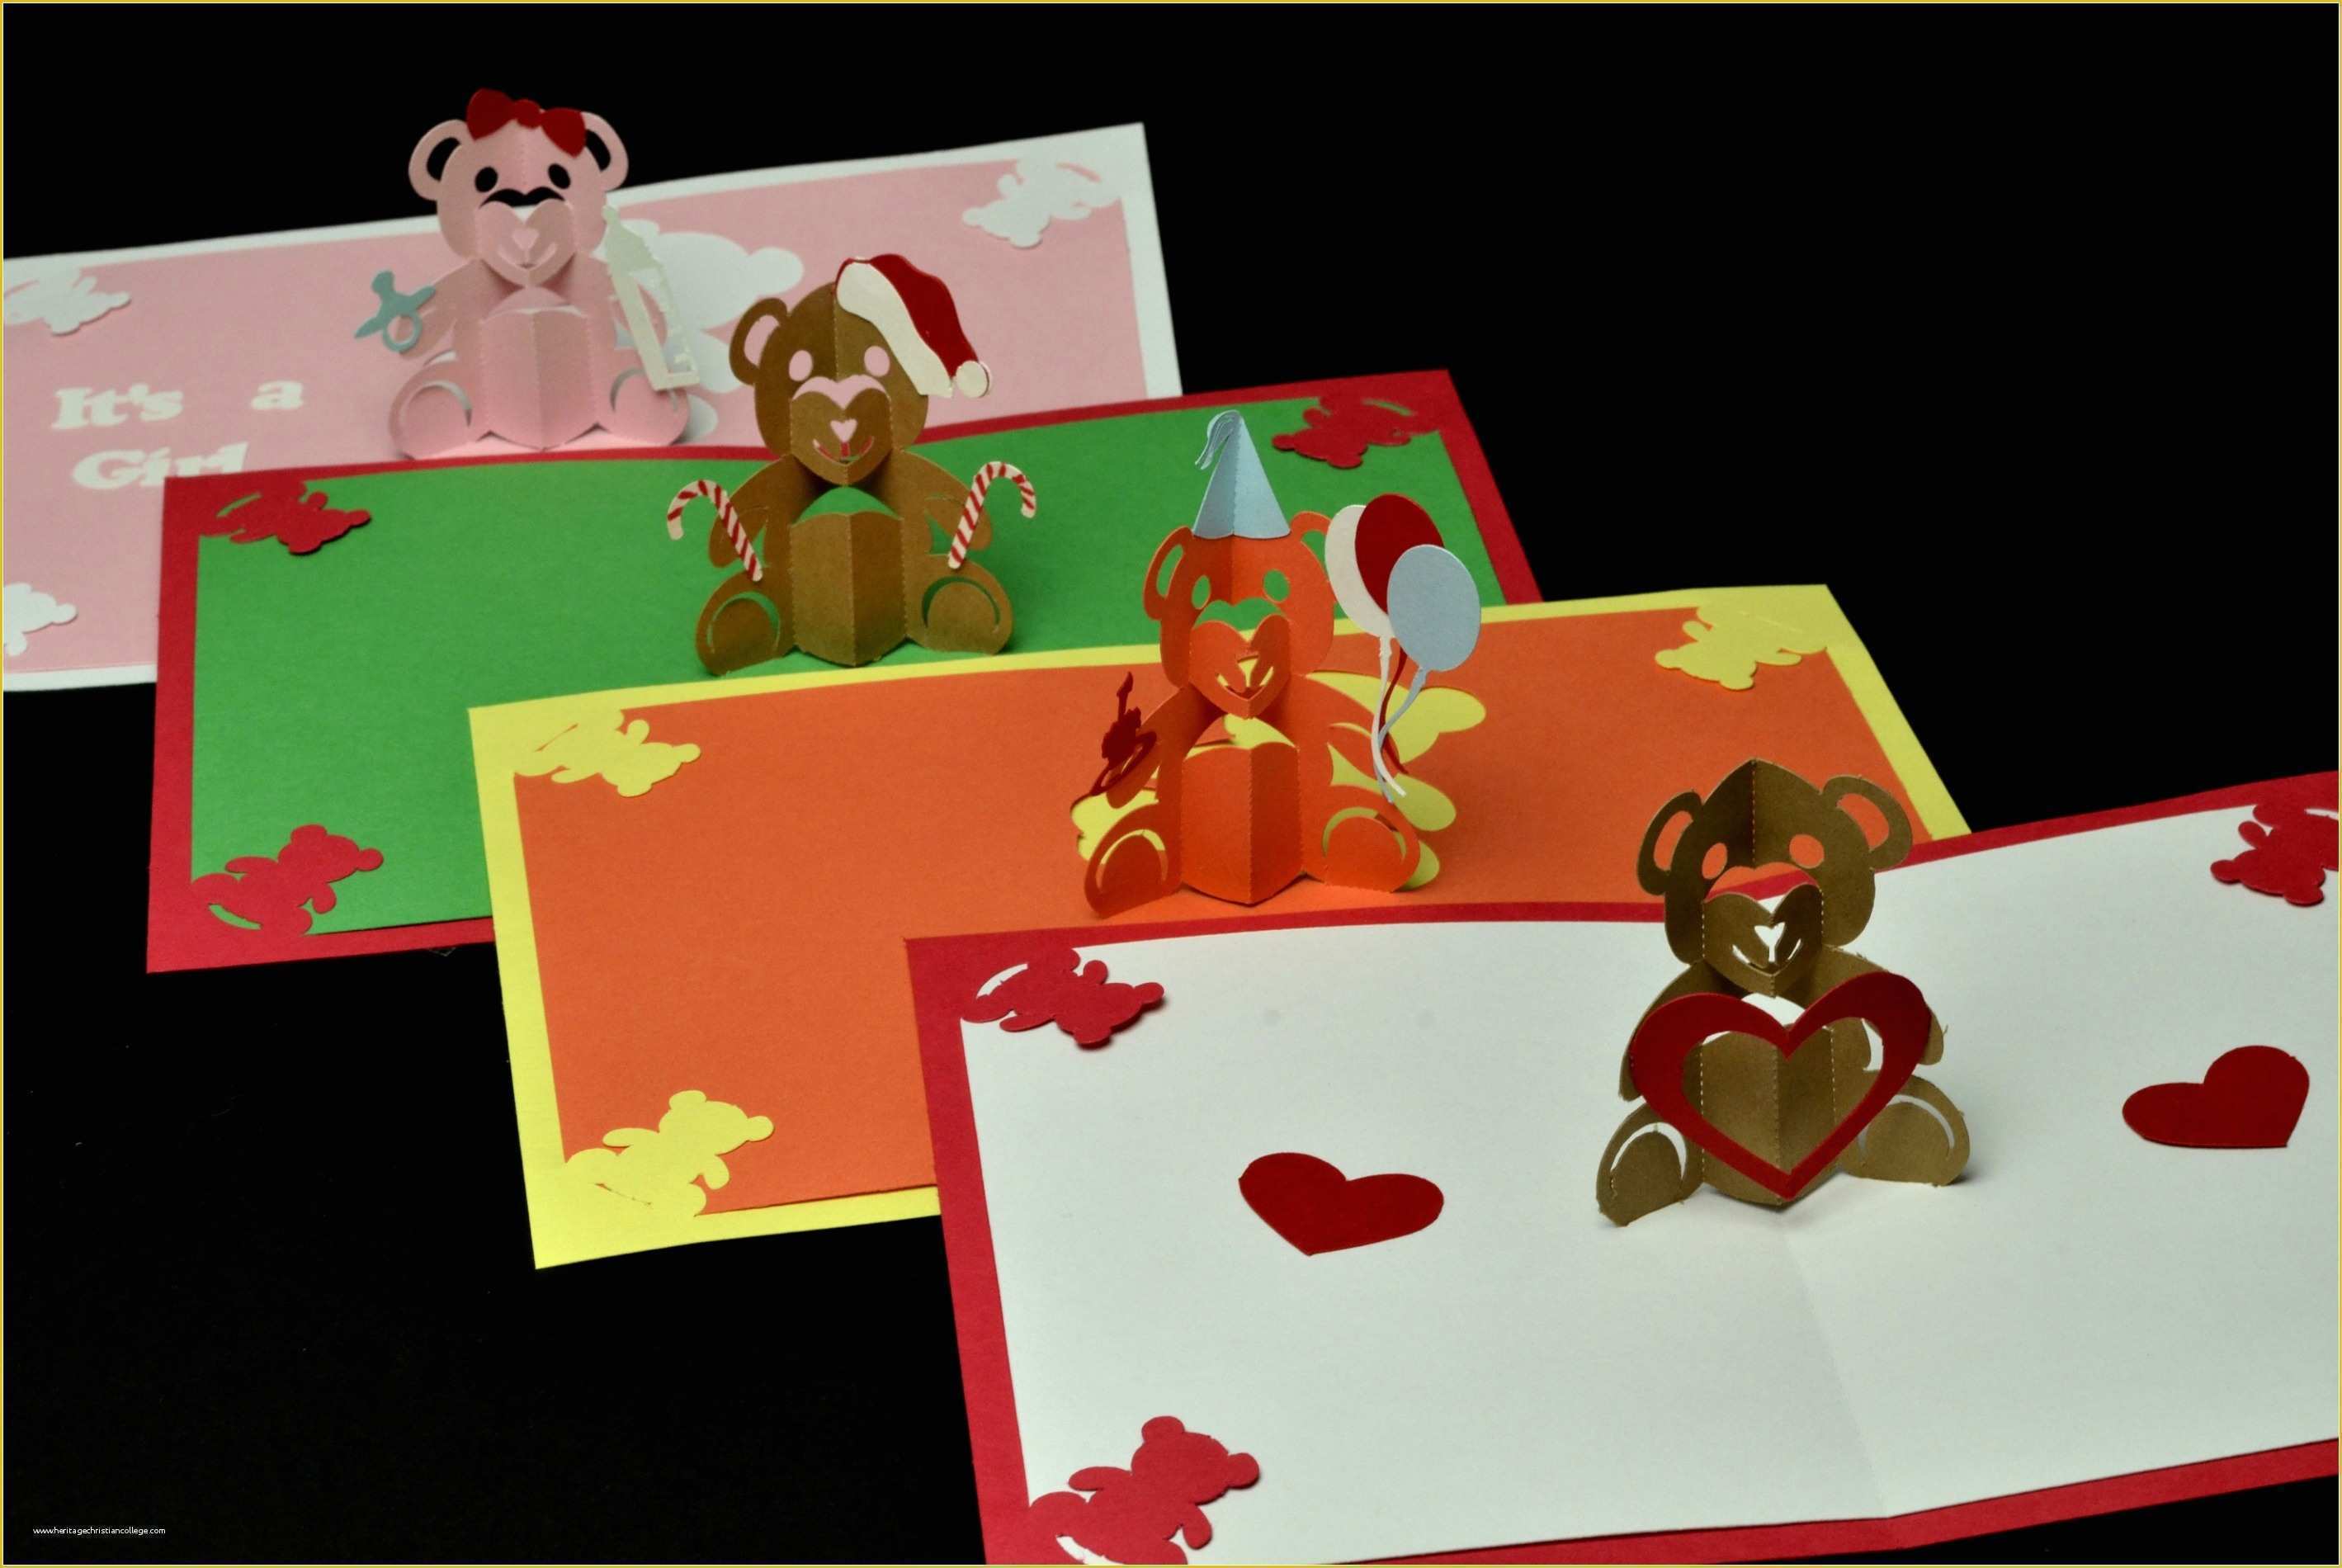 Pop Up Card Templates Free Download Of Teddy Bear Love Pop Up Card Template Design Teddy Bear Pop